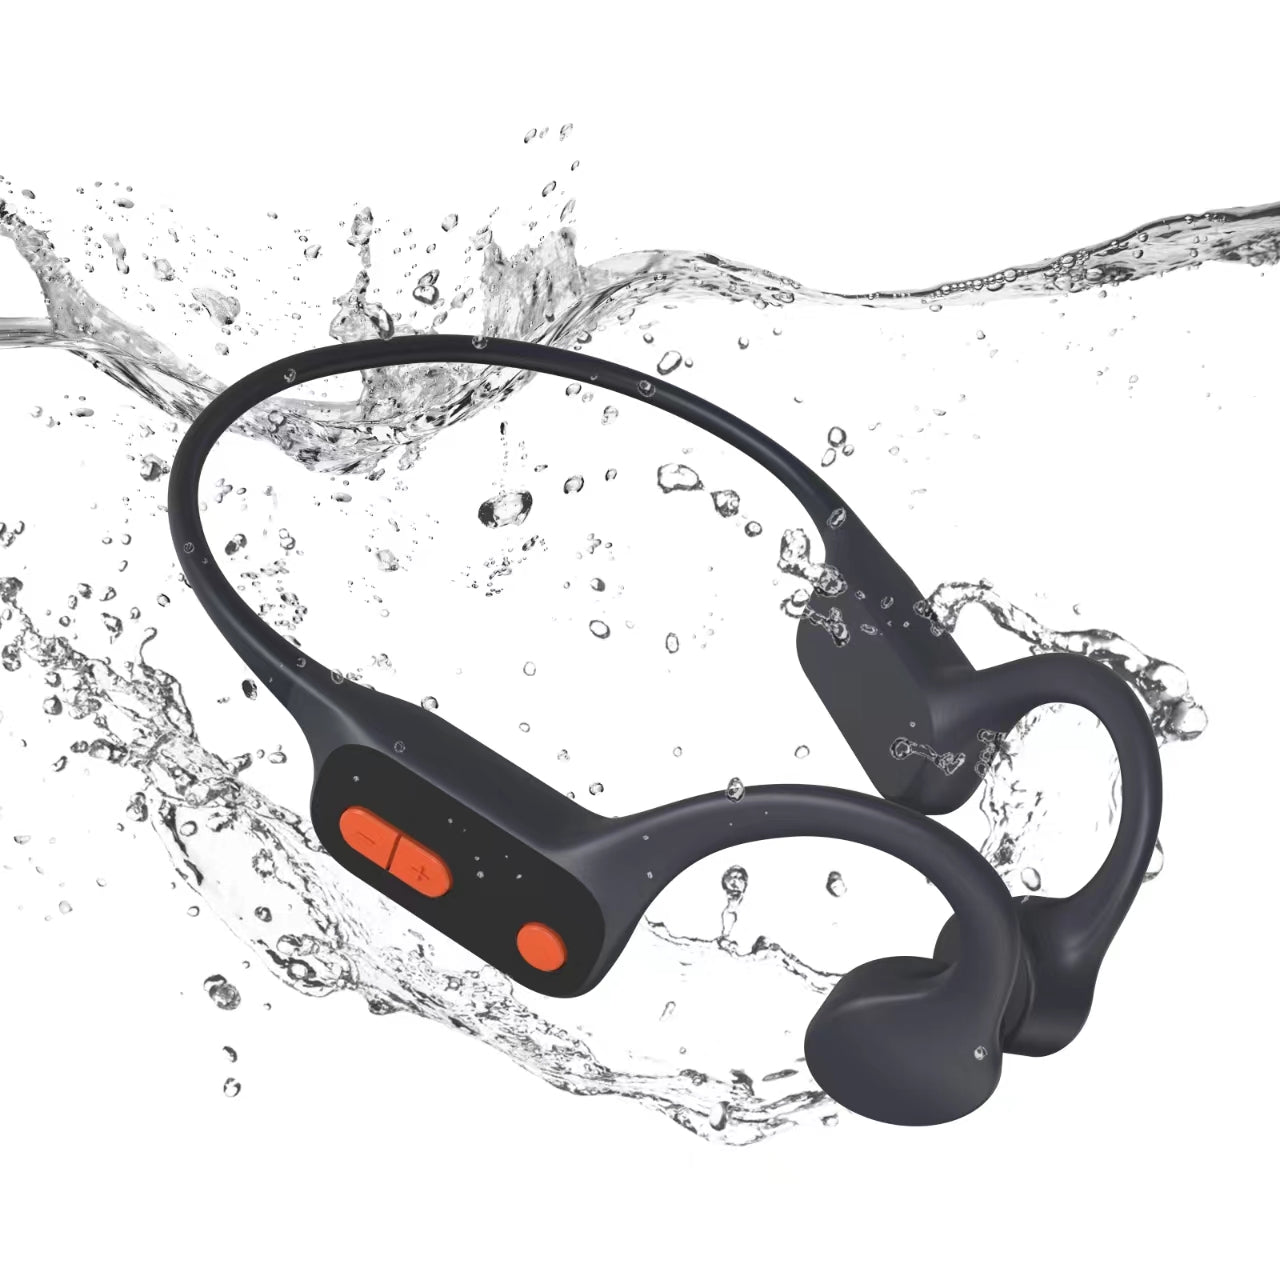 Tayogo | The Professional Waterproof MP3 Player for Swimming